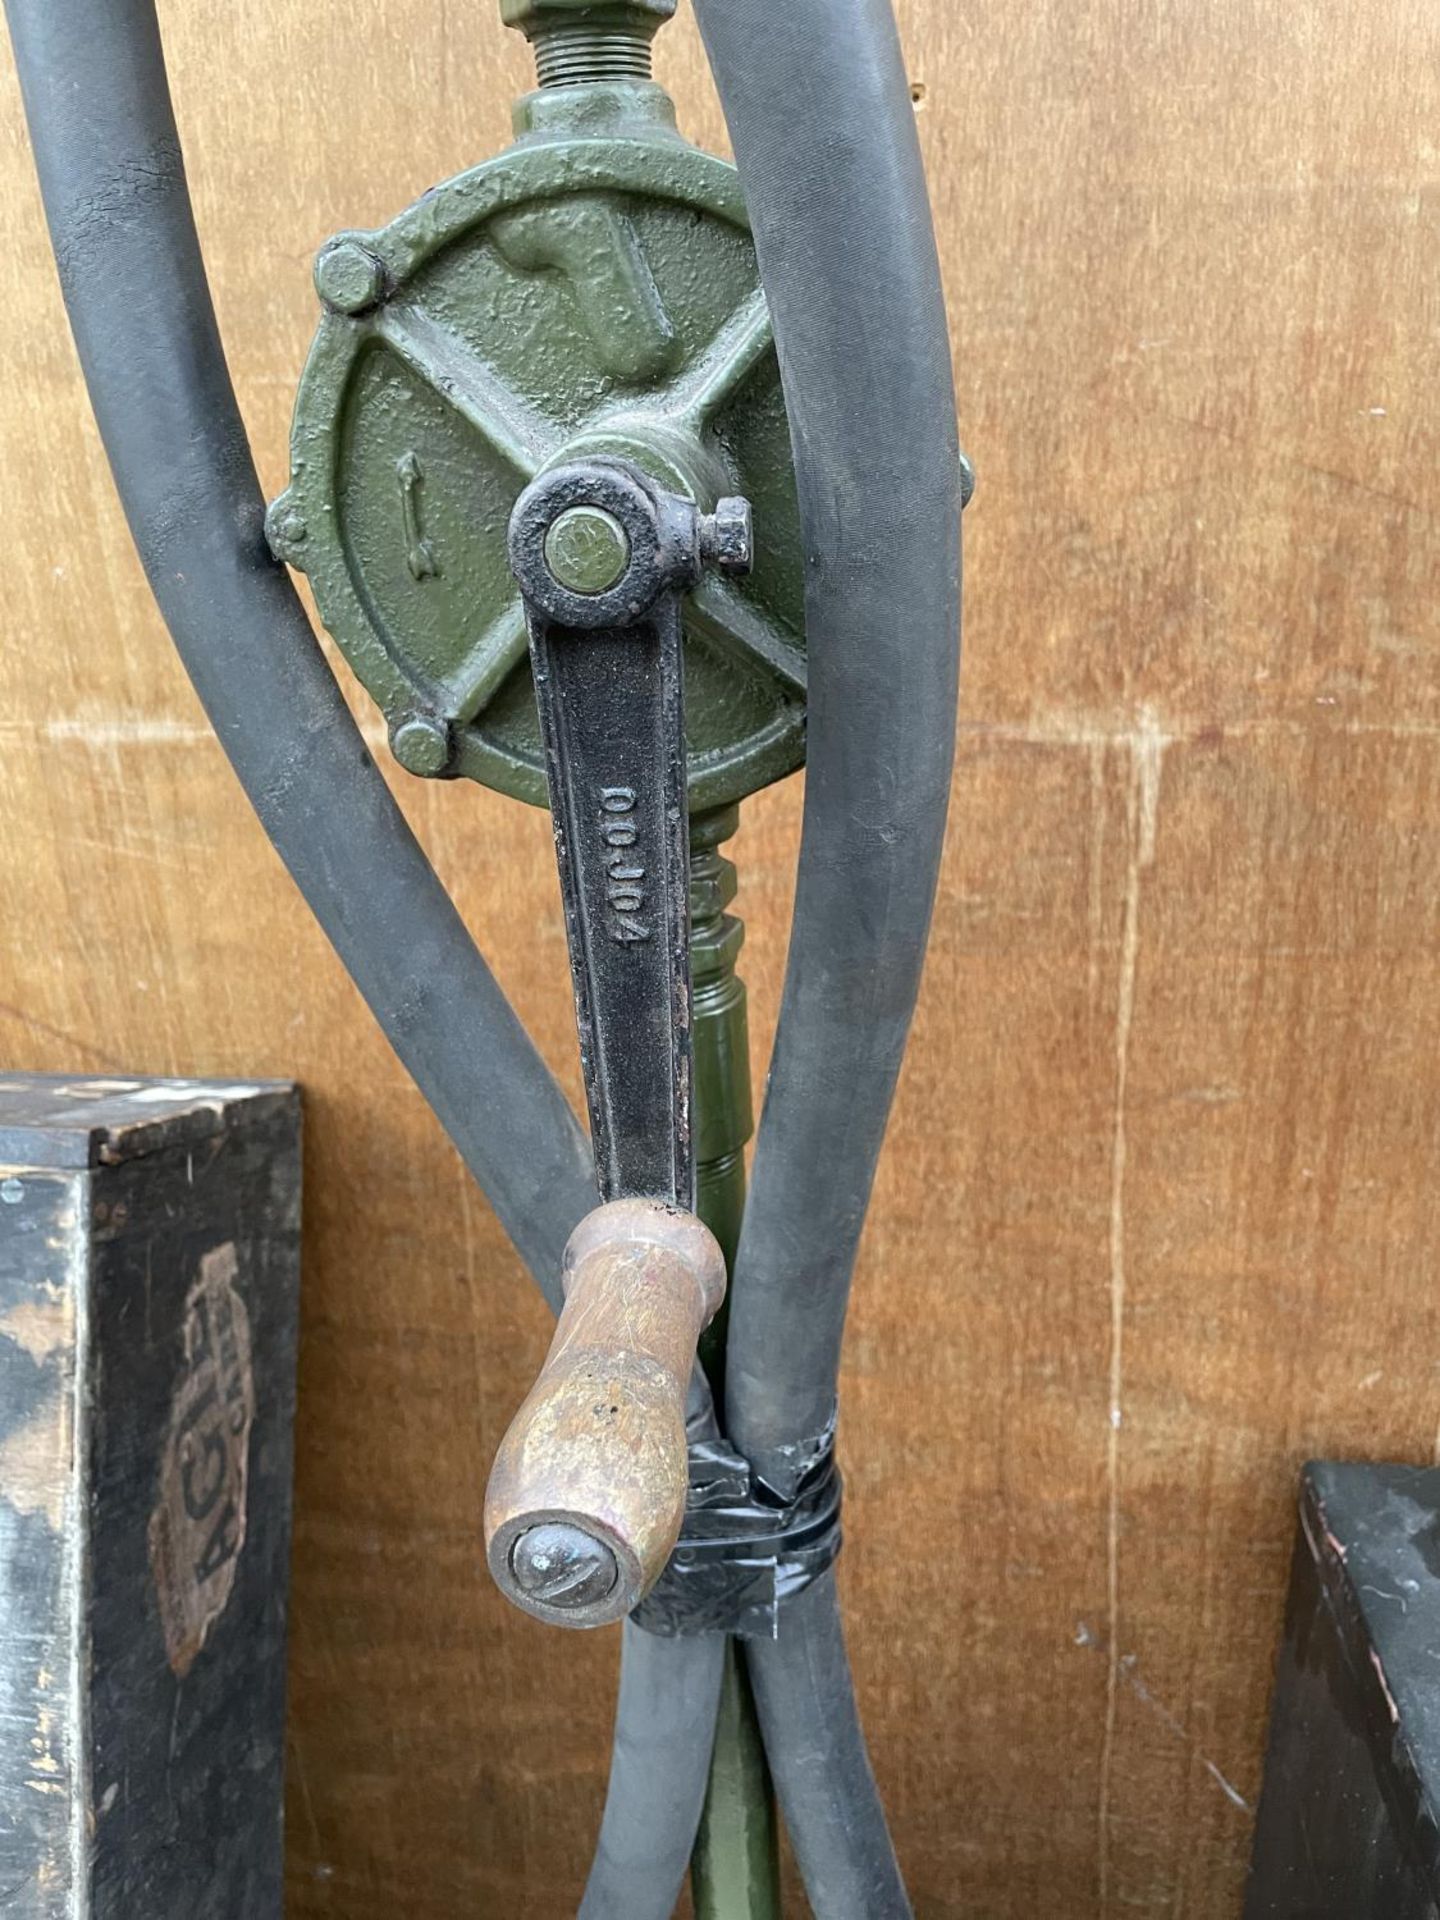 A PRATTS MANUAL PETROL PUMP WITH BRASS NOZZLE - Image 4 of 5